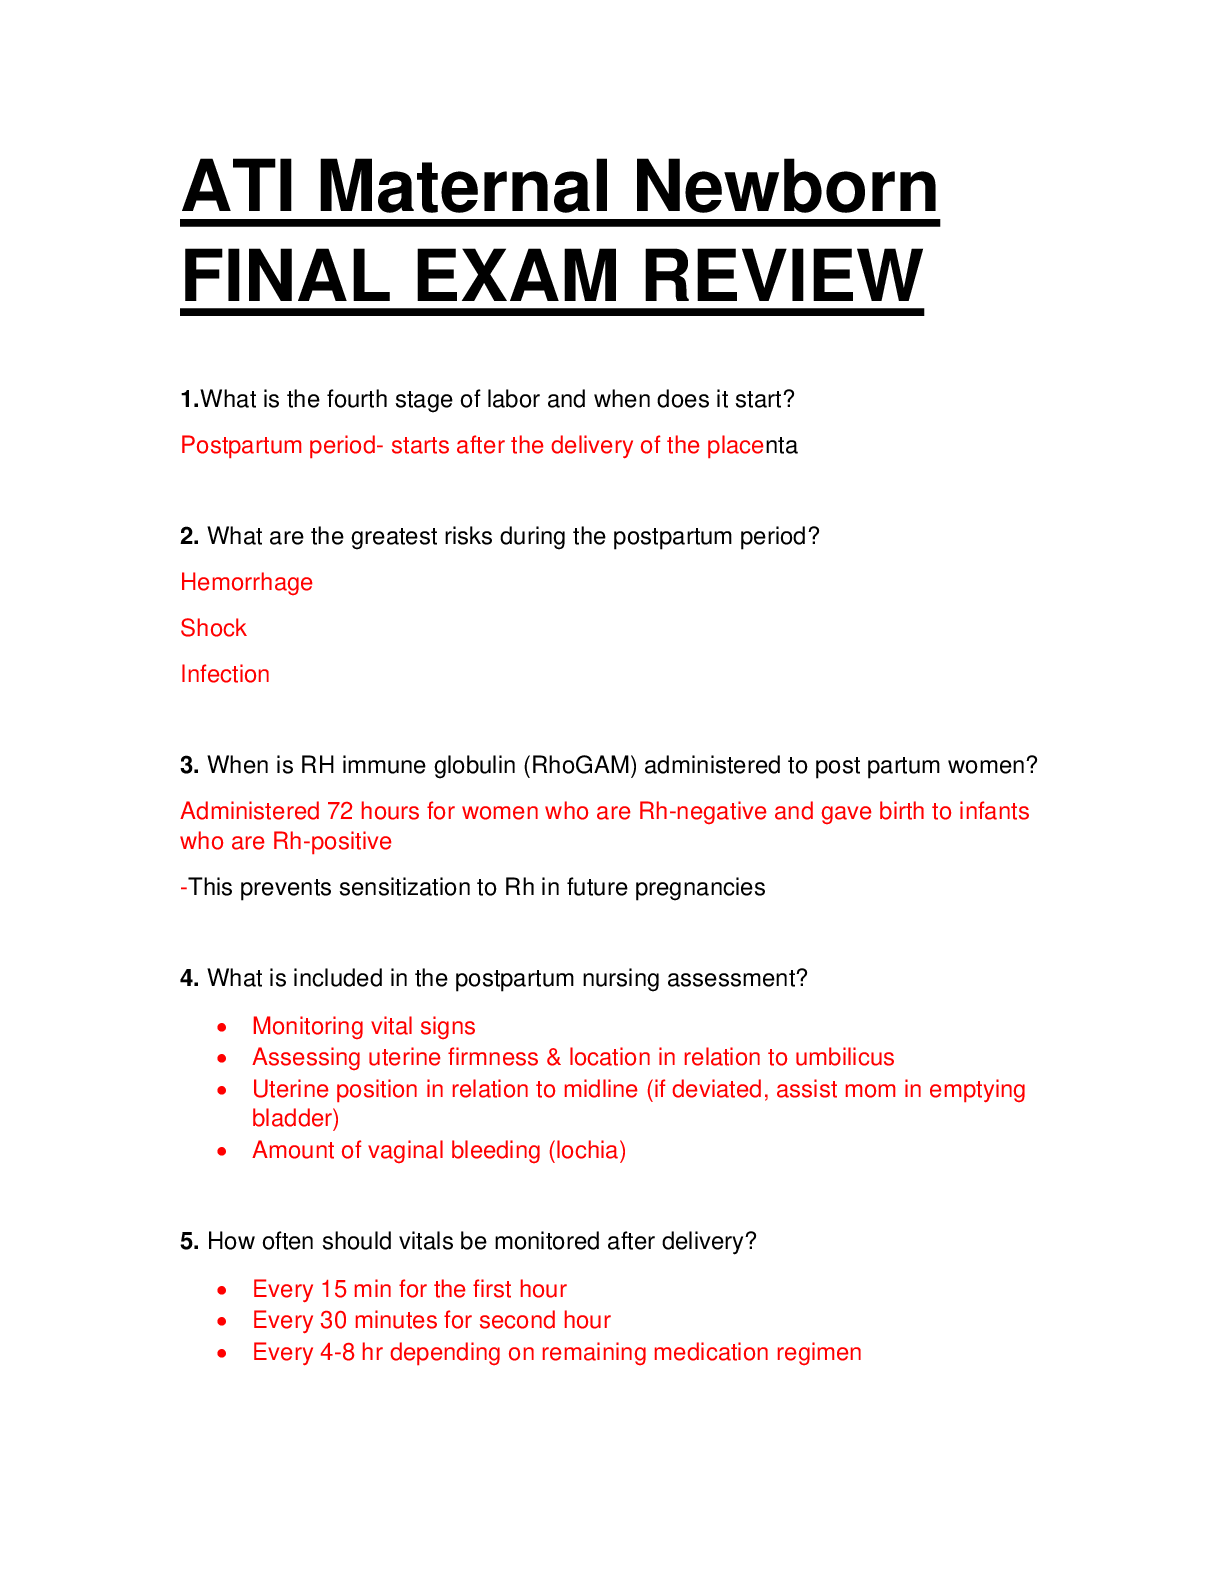 ATI MATERNAL NEWBORN FINAL EXAM REVIEW. QUESTIONS WITH VERIFIED ANSWERS